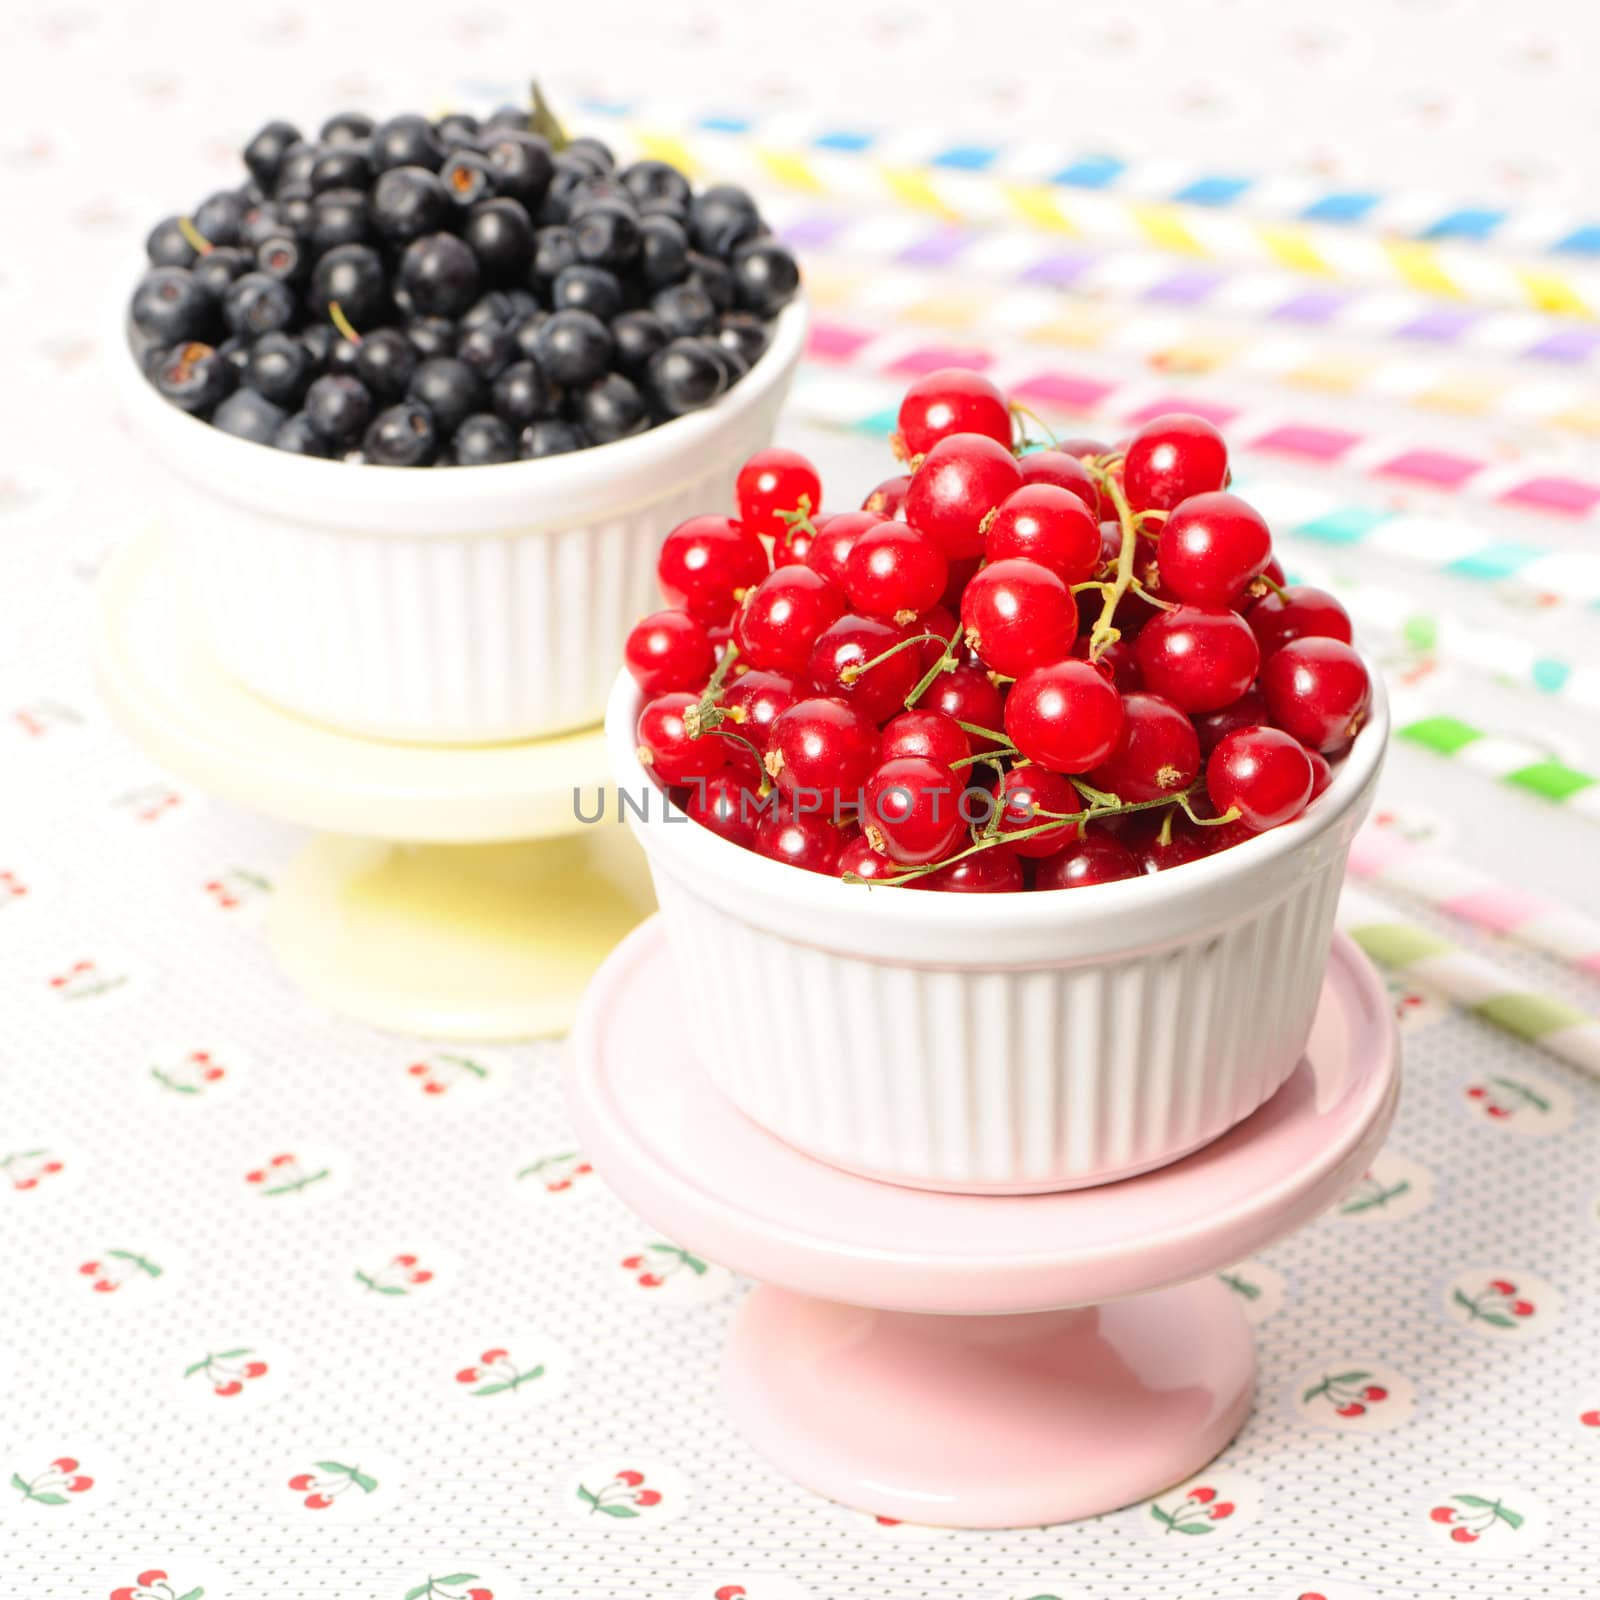 Wild berries in bowls by haveseen